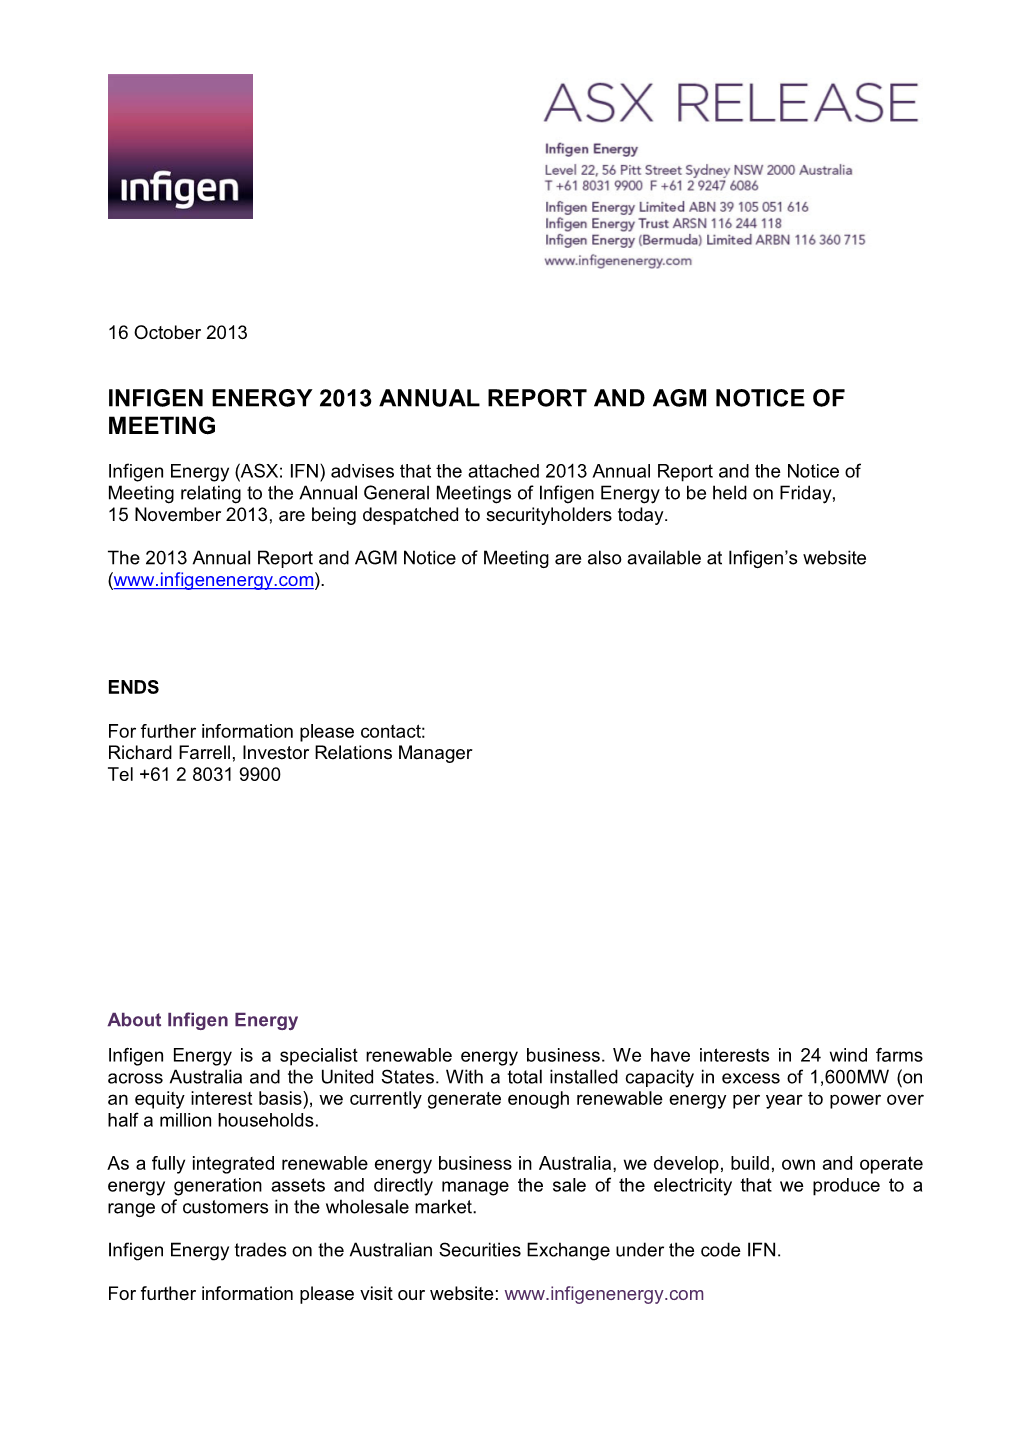 Infigen Energy 2013 Annual Report and Agm Notice of Meeting